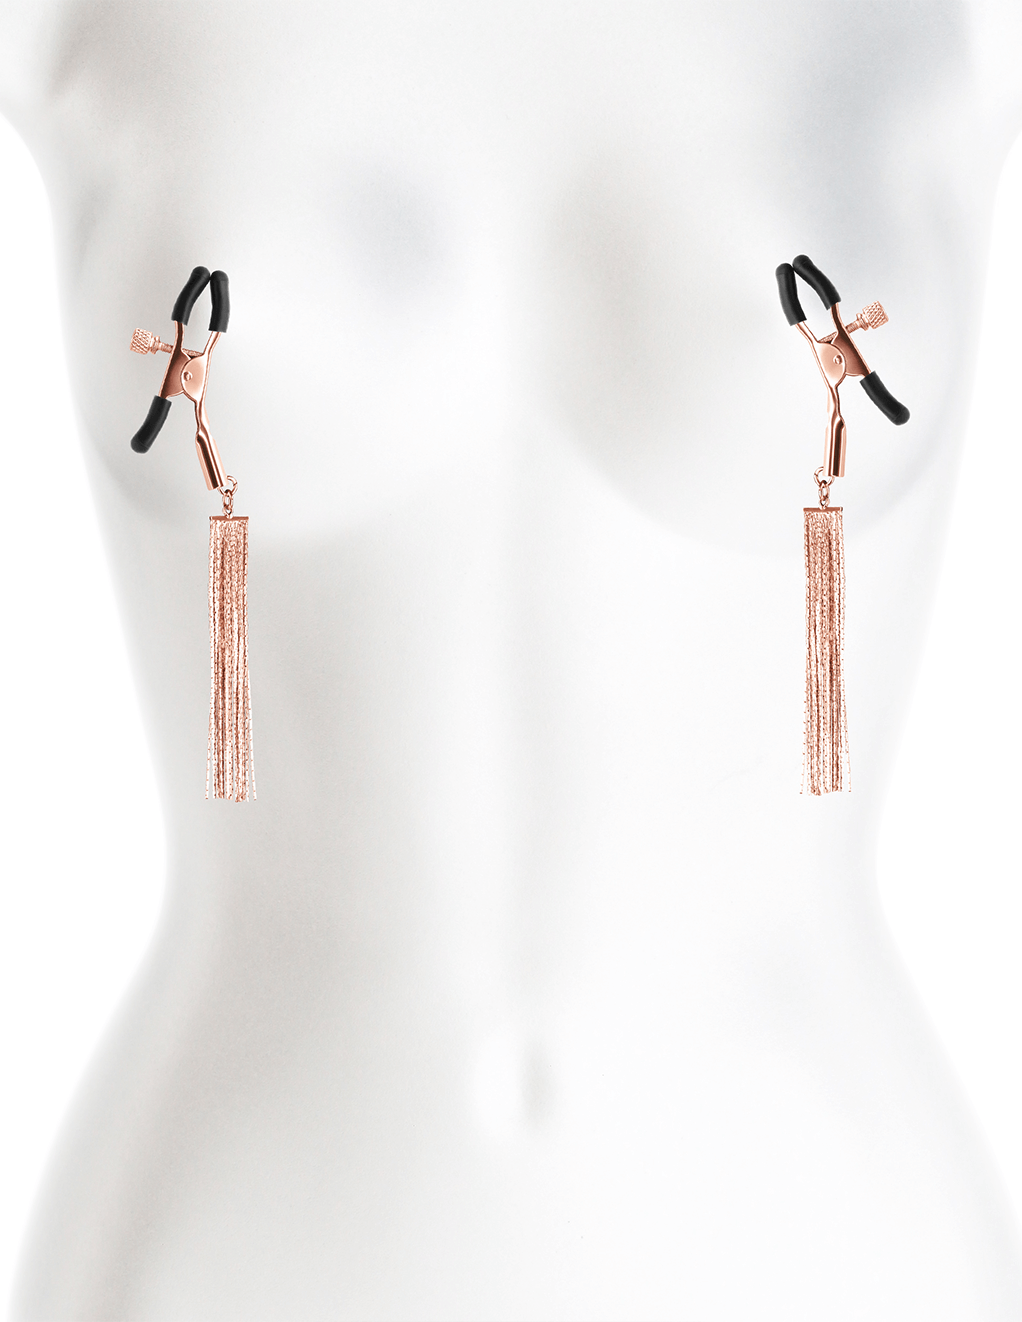 Adjustable Metal Tassle Clamps D2 - Rose Gold Clamps